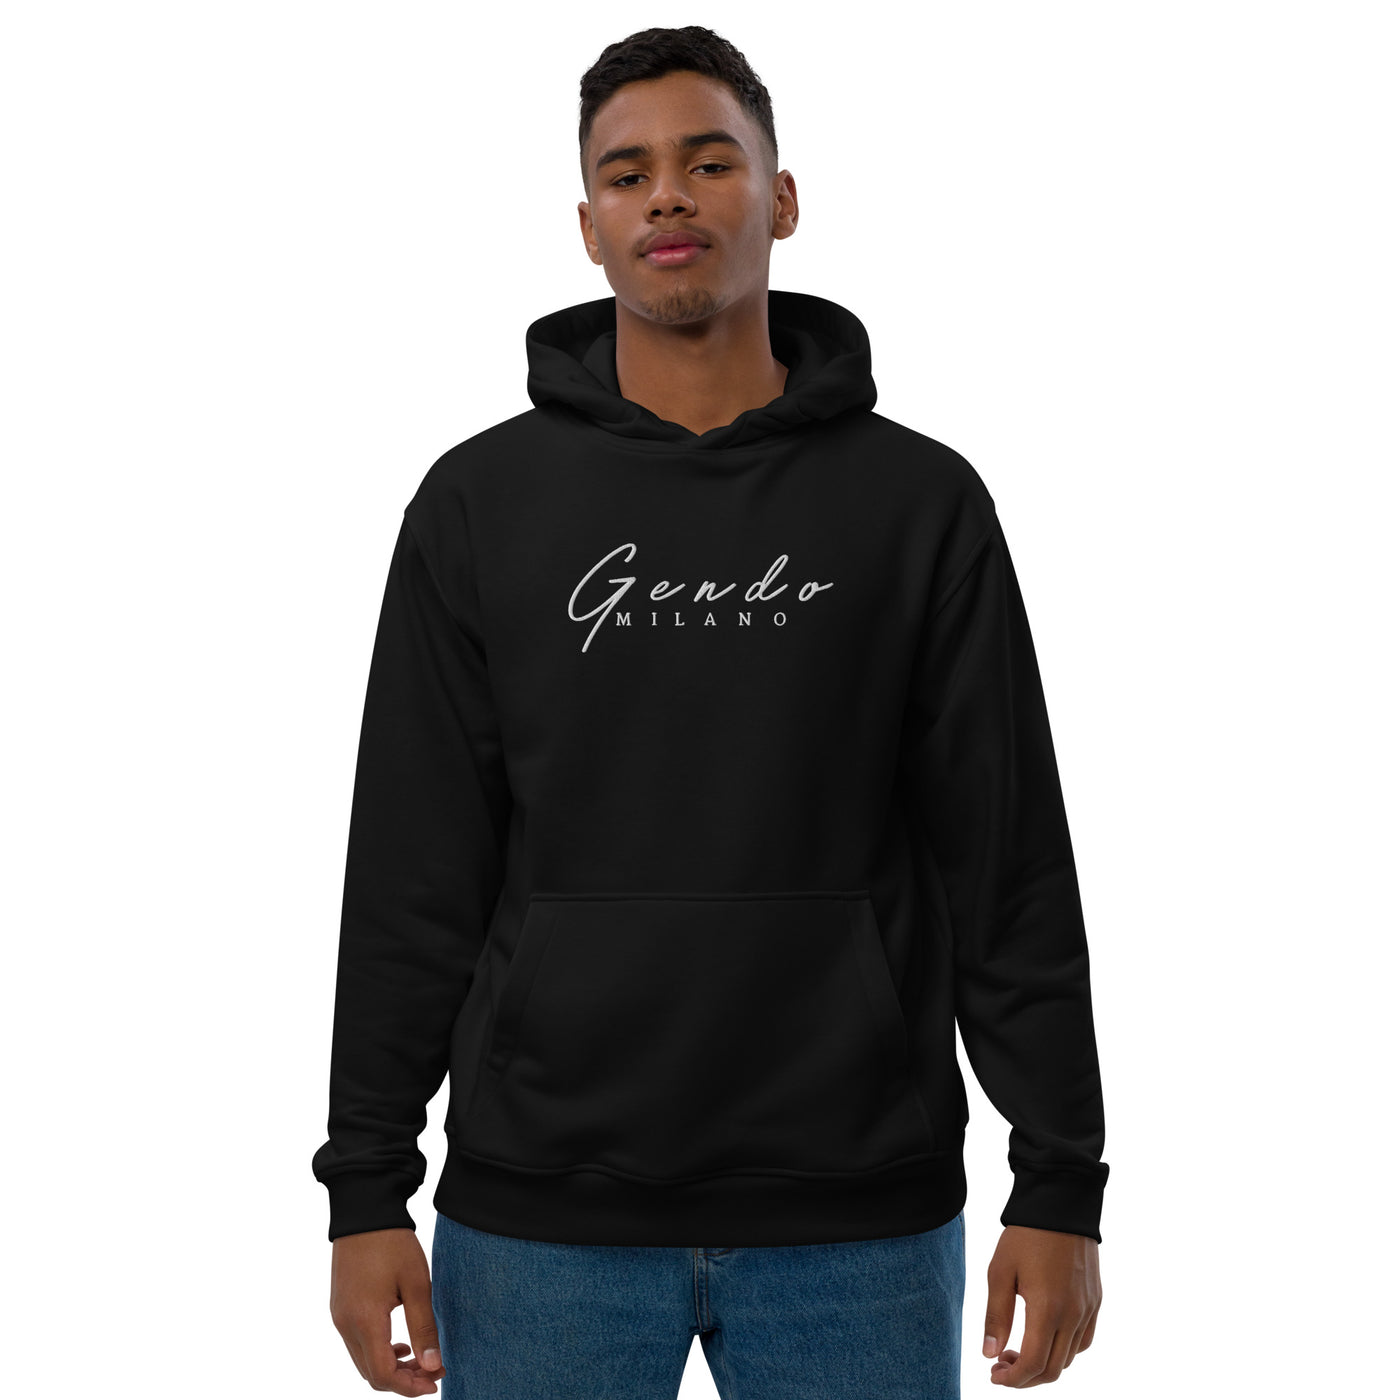 Gendo Milano Embroidered Hoodie